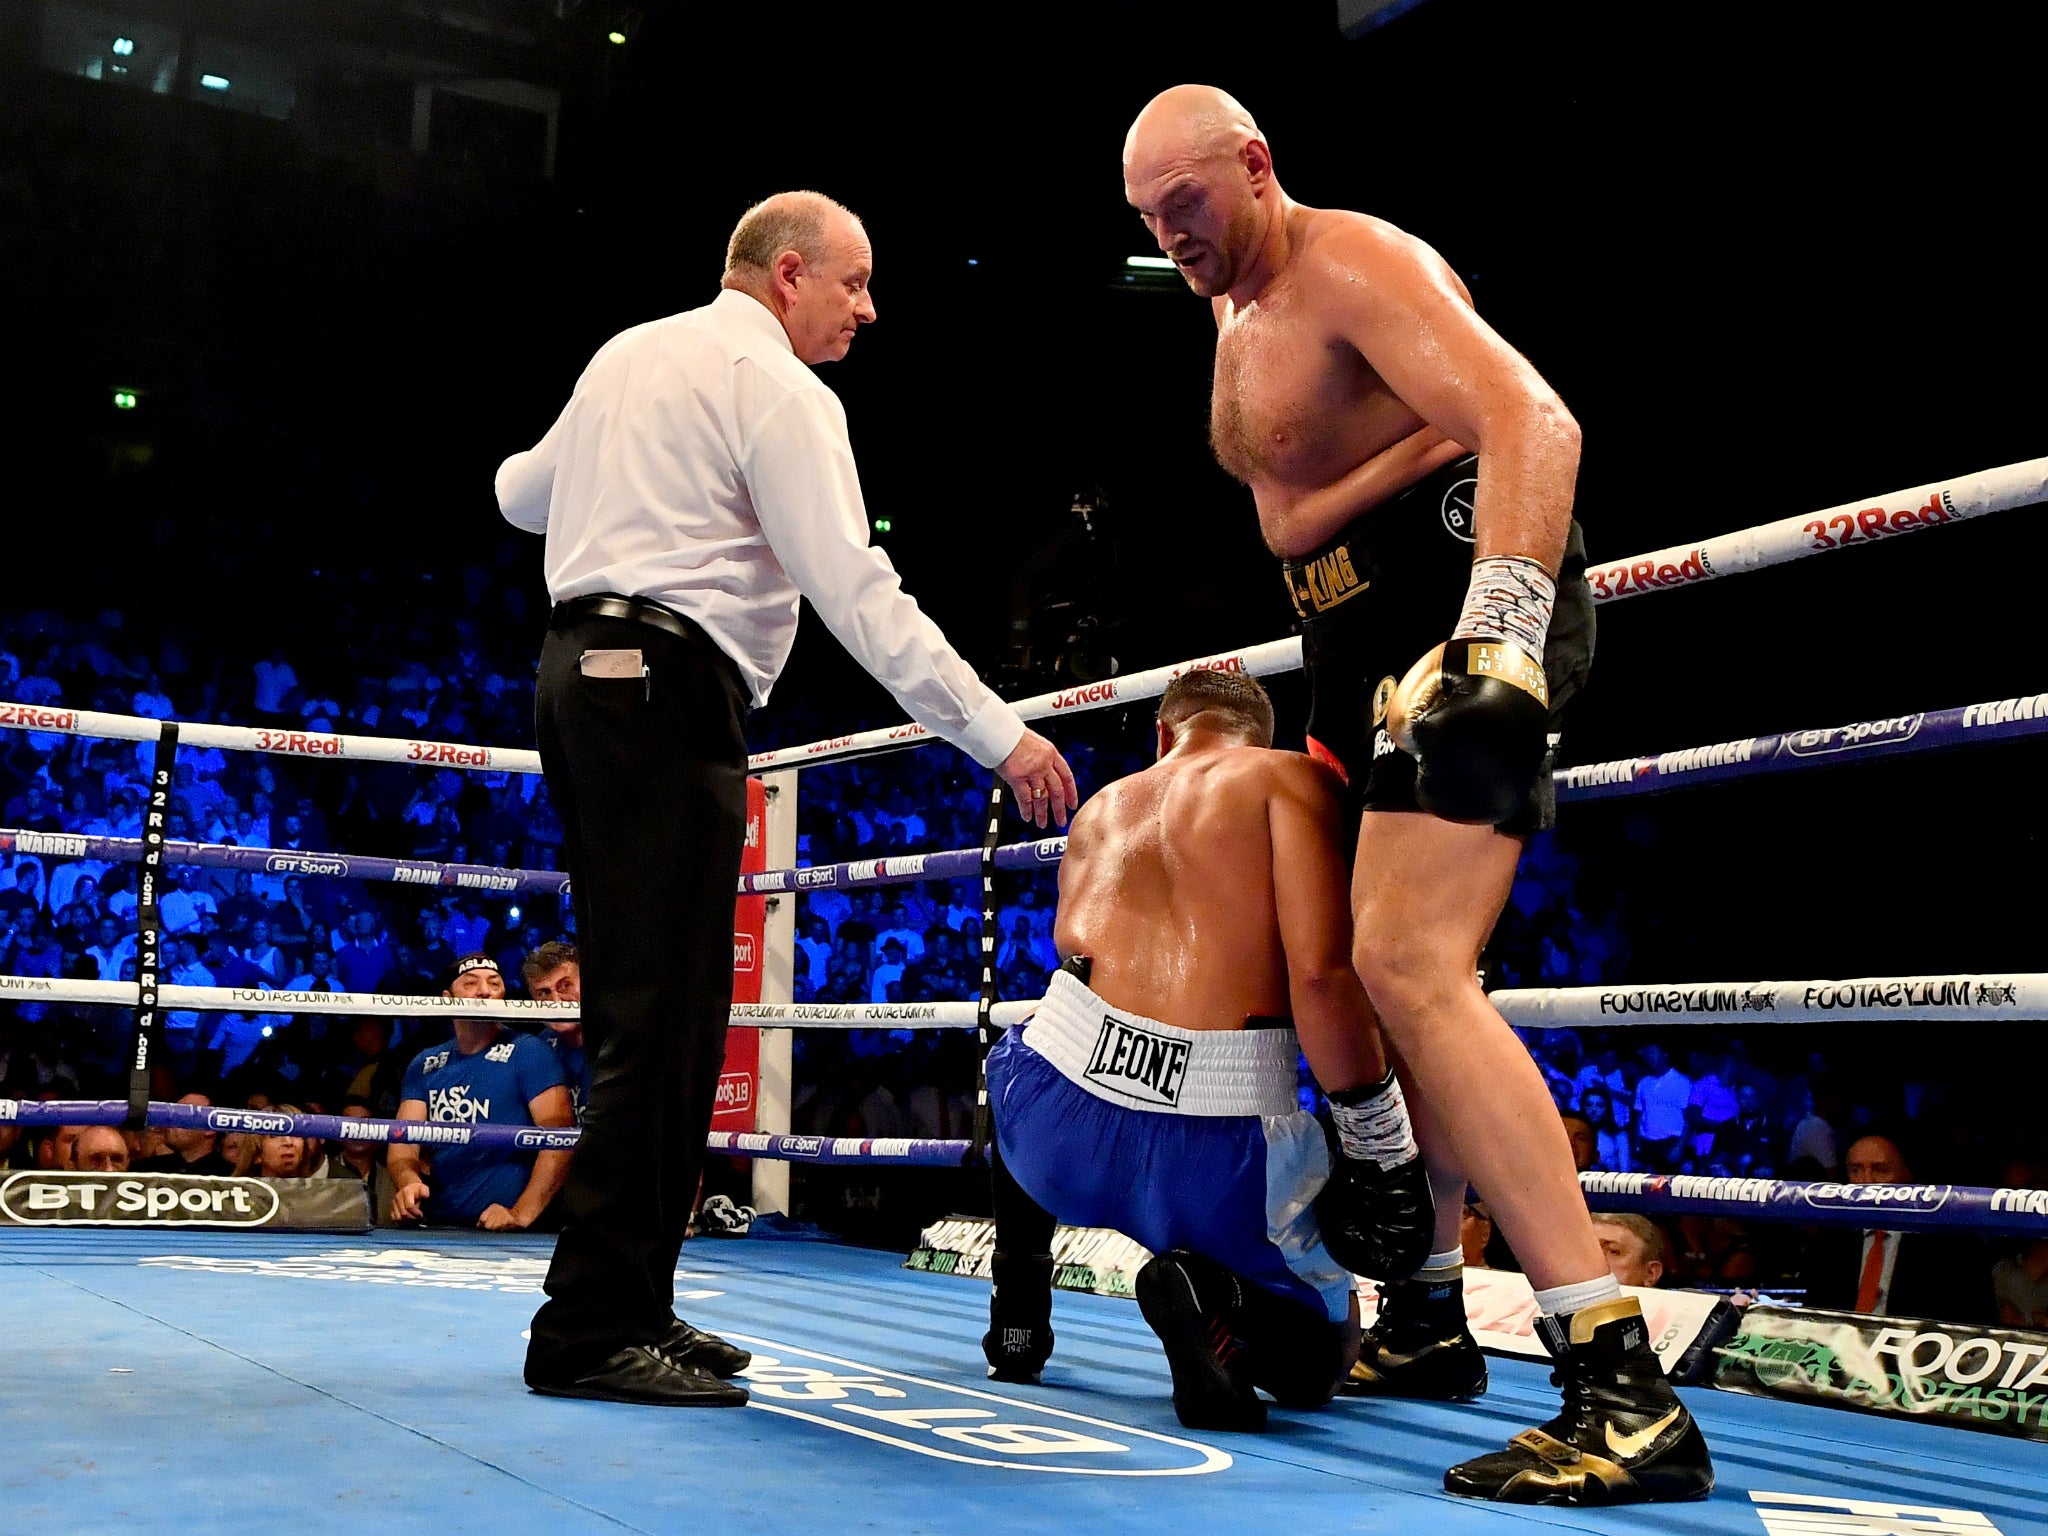 Fury's return left a lot to be desired from the former world champion